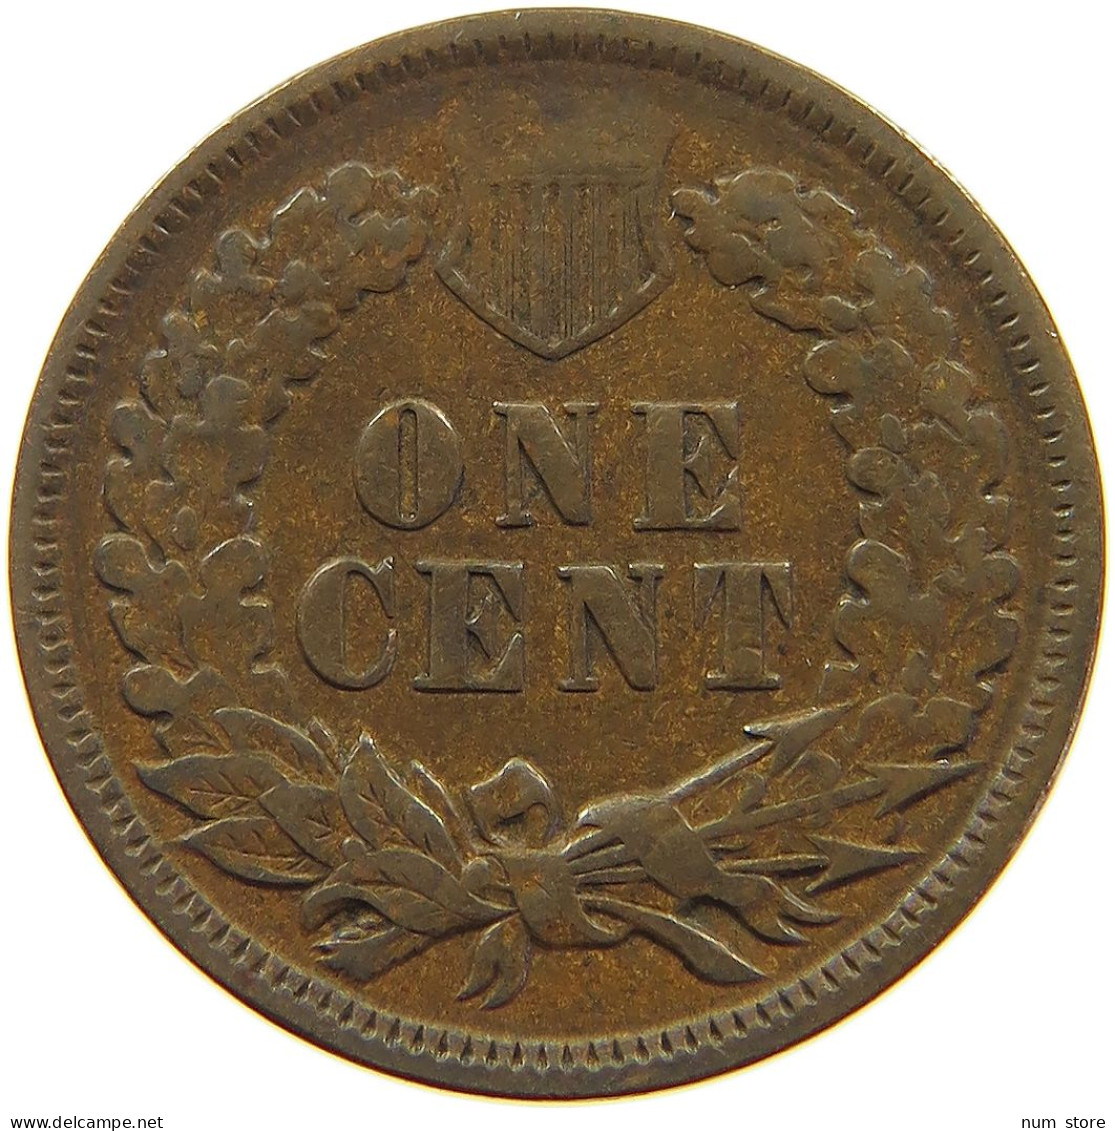 UNITED STATES OF AMERICA CENT 1895 INDIAN HEAD #a063 0253 - 1859-1909: Indian Head